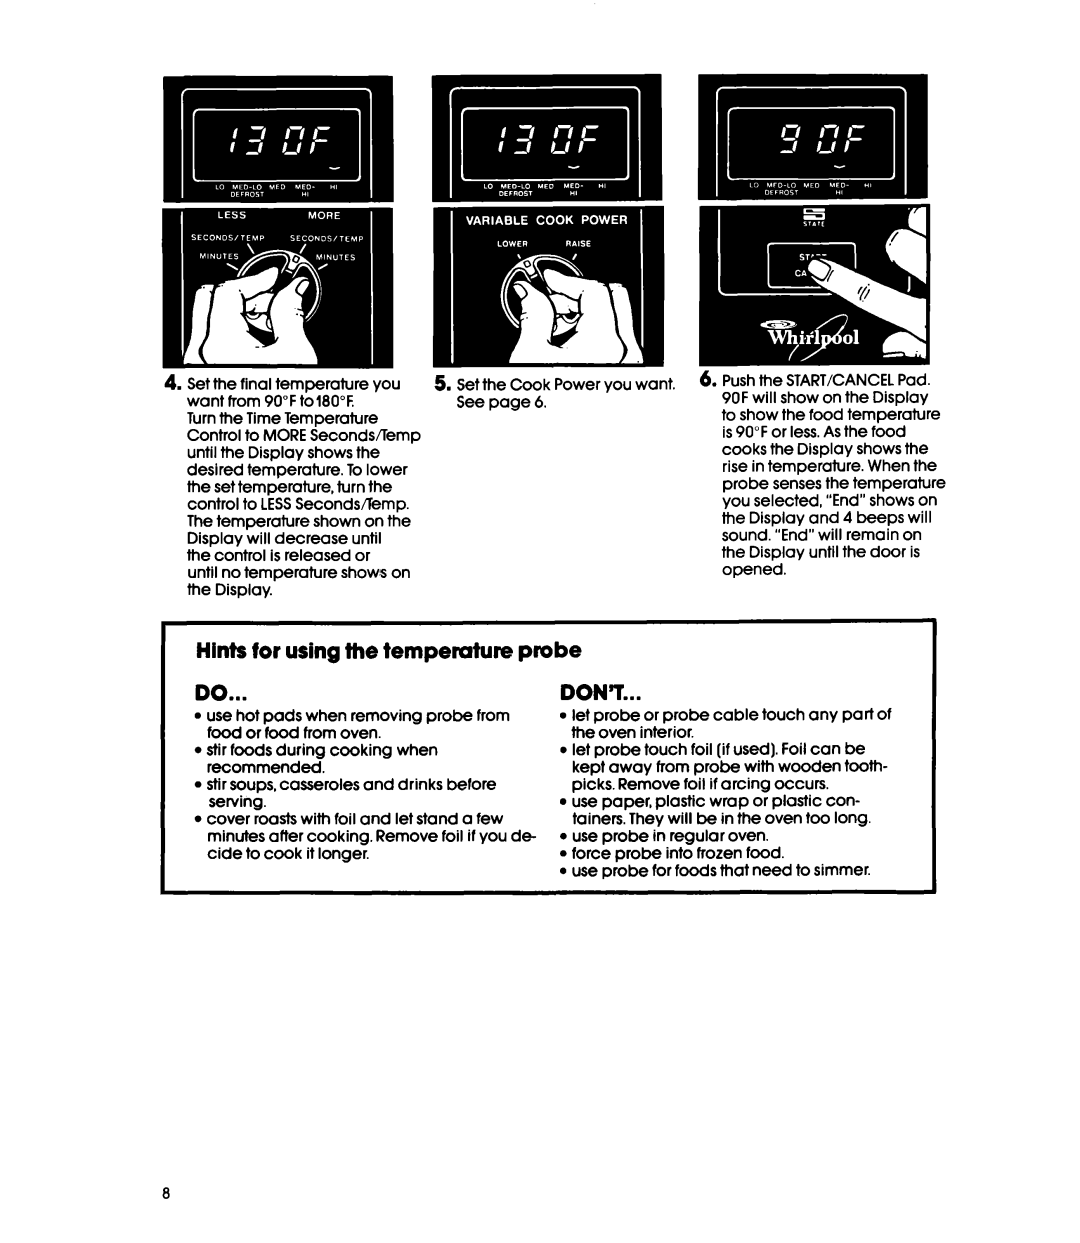 Whirlpool Microwace Oven manual Hints for using the temperature probe, Don’T 